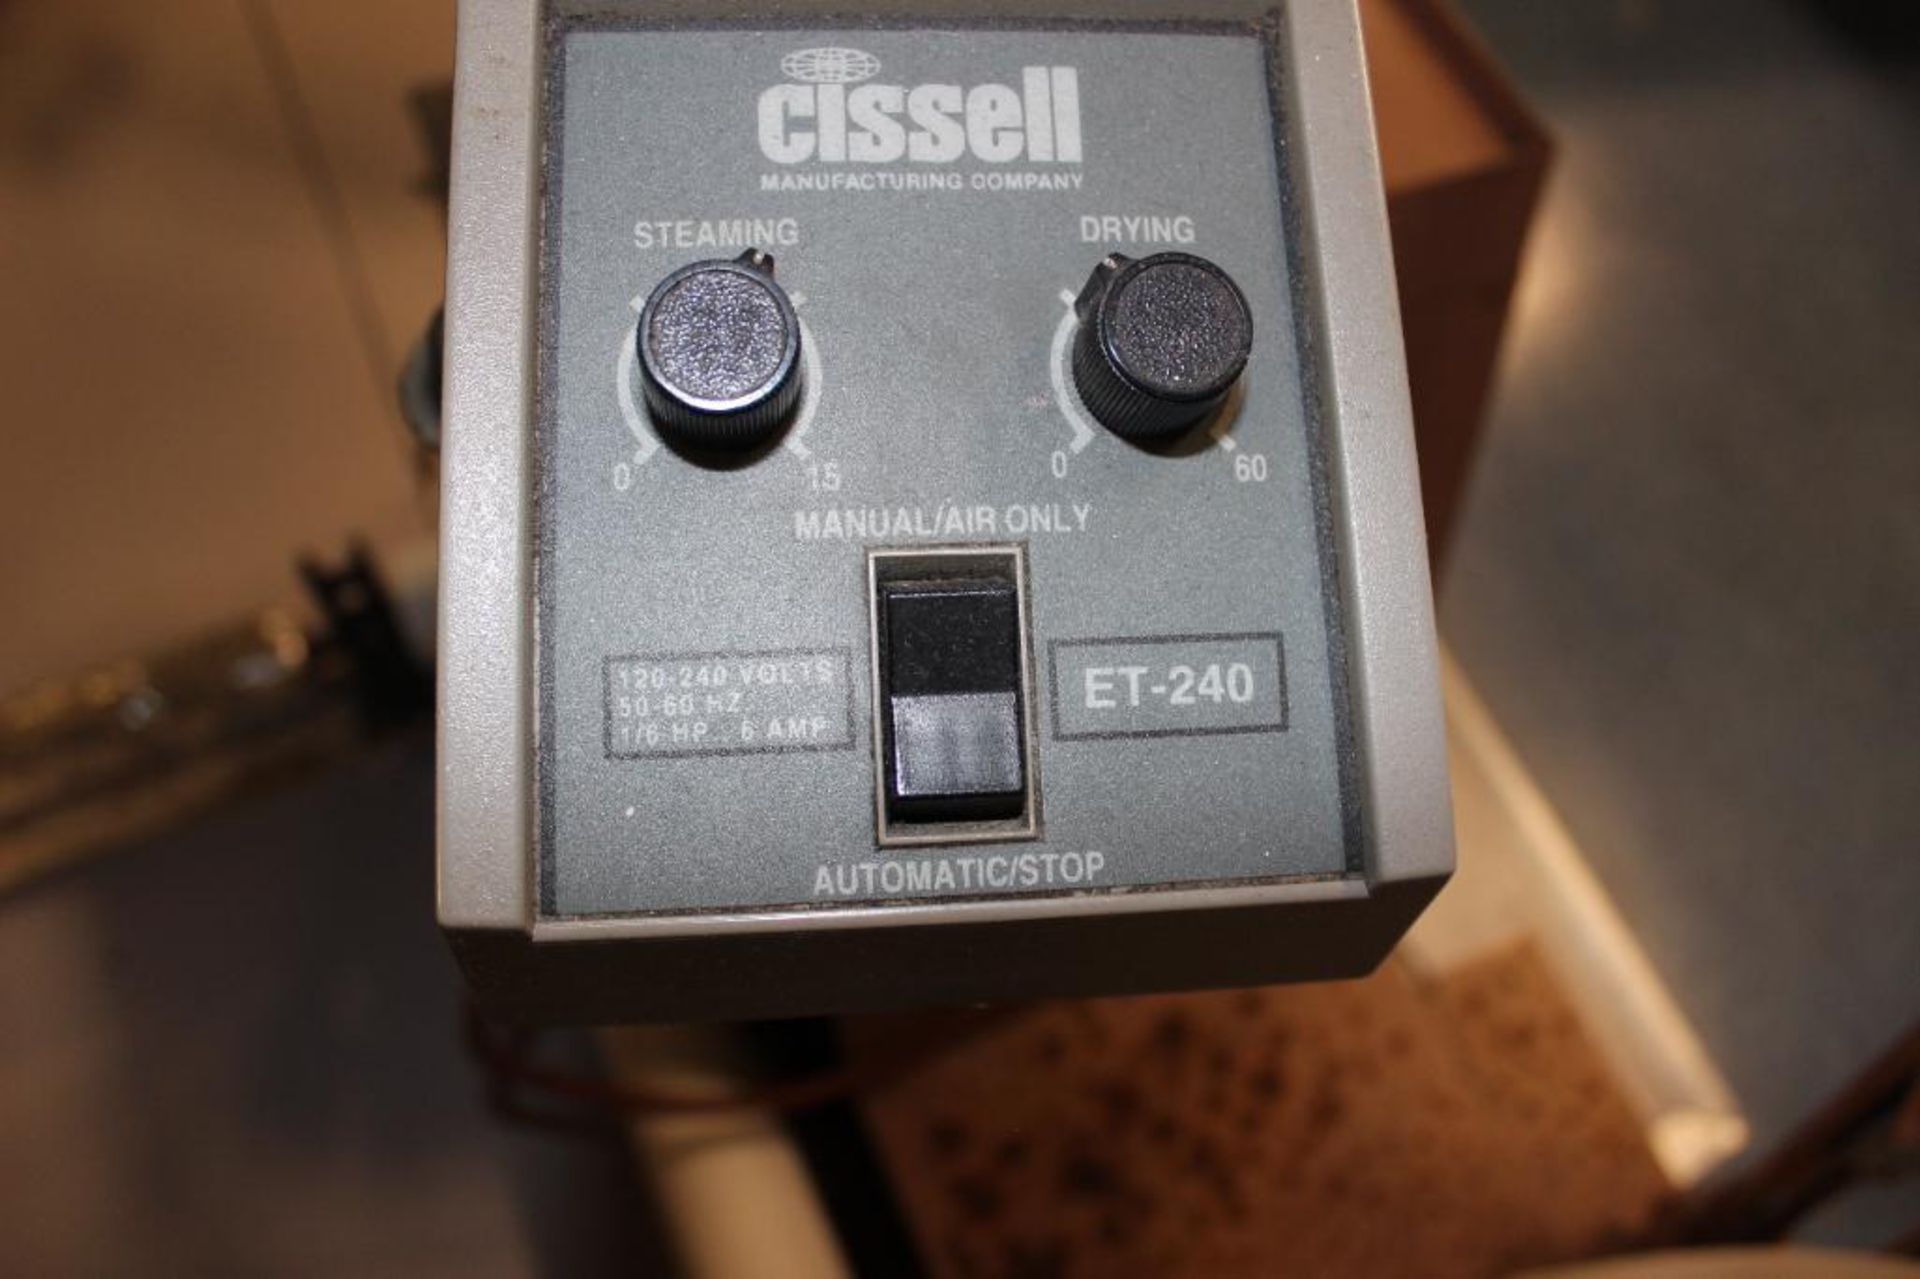 WM Cissell form finisher product AHB-10 model FFCD s/n 56298 - Image 6 of 6